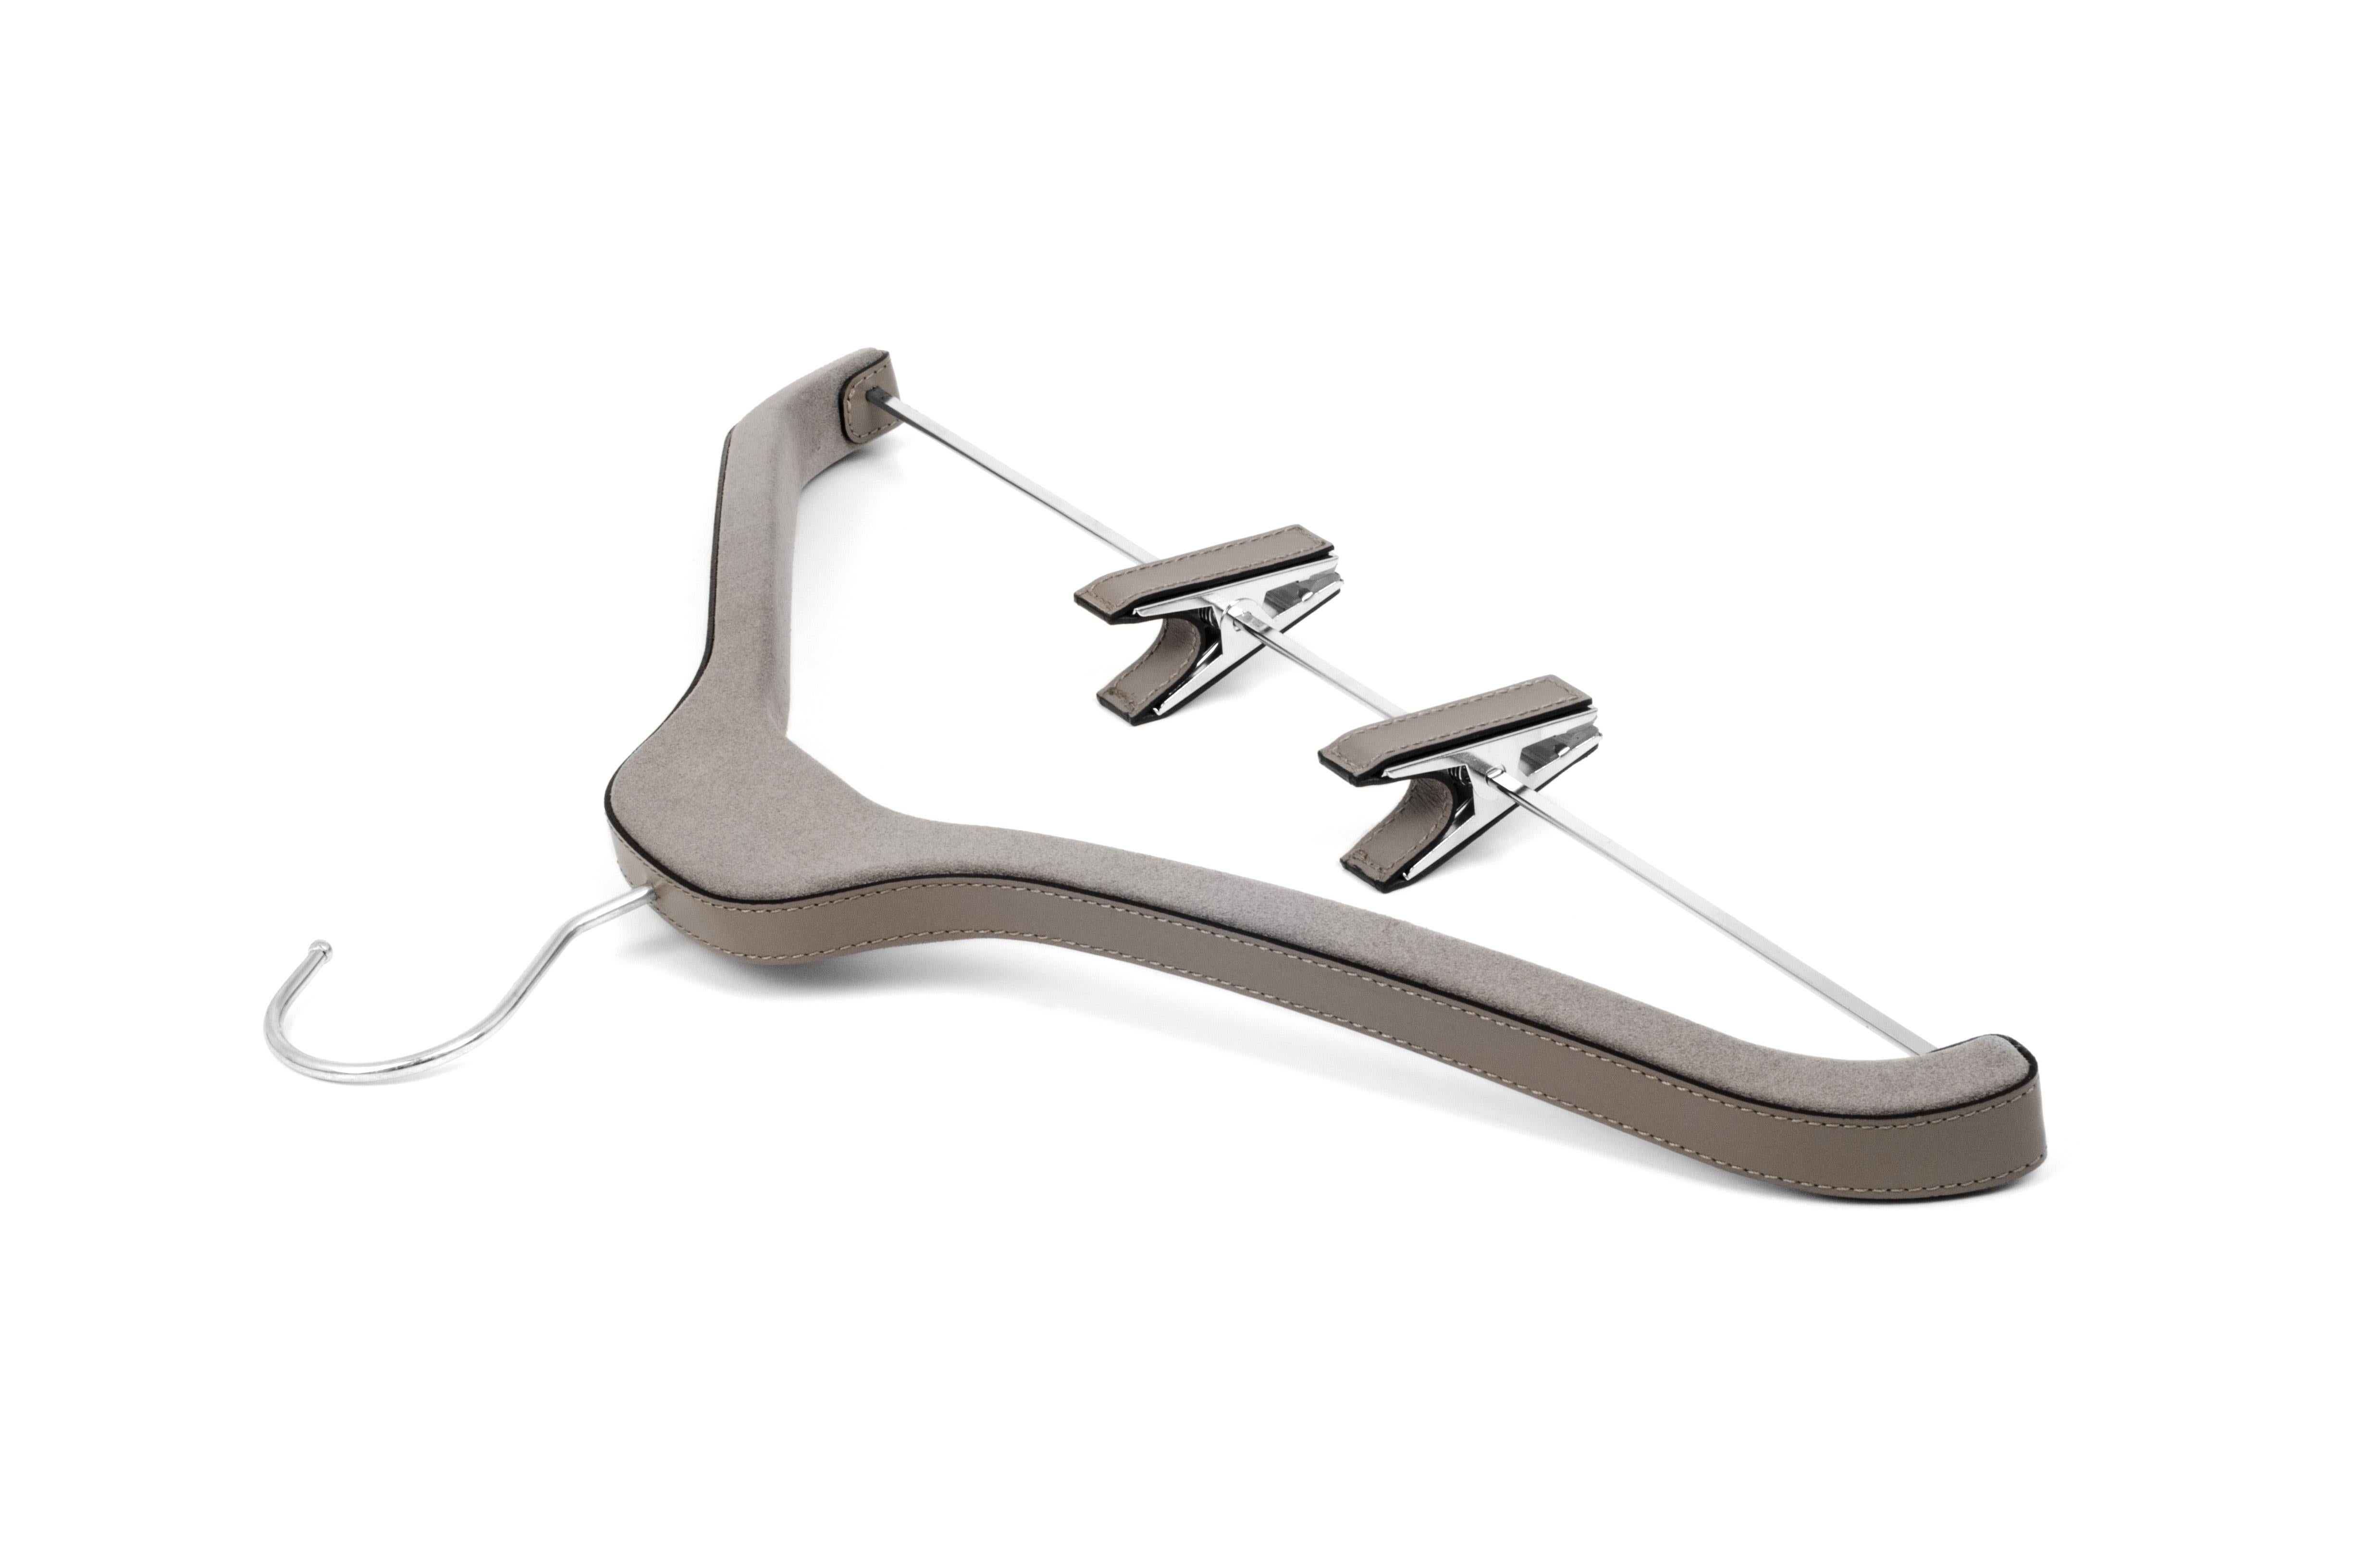 Not only fit for adult clothes, but also fit for children's clothes. Clips can move along bar to adjust for different garment widths. 

With a leather and soft microfiber coating, our hanger looks classy with the metal clips ideal for hanging